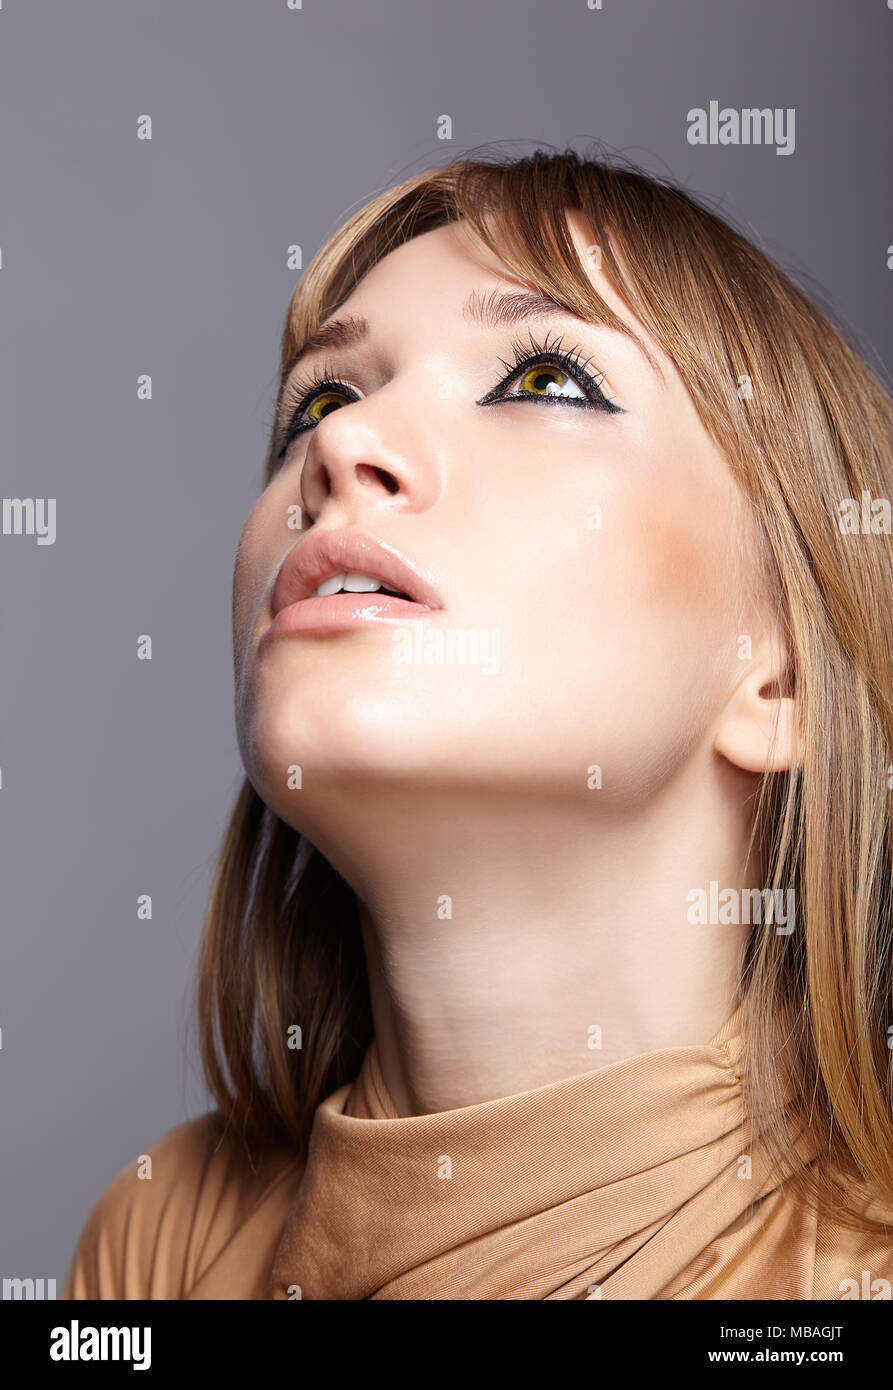 Portrait of blonde young woman looking up. Female with green eyes and long straight hair. Girl dressed in beige dress on gray background. Stock Photo